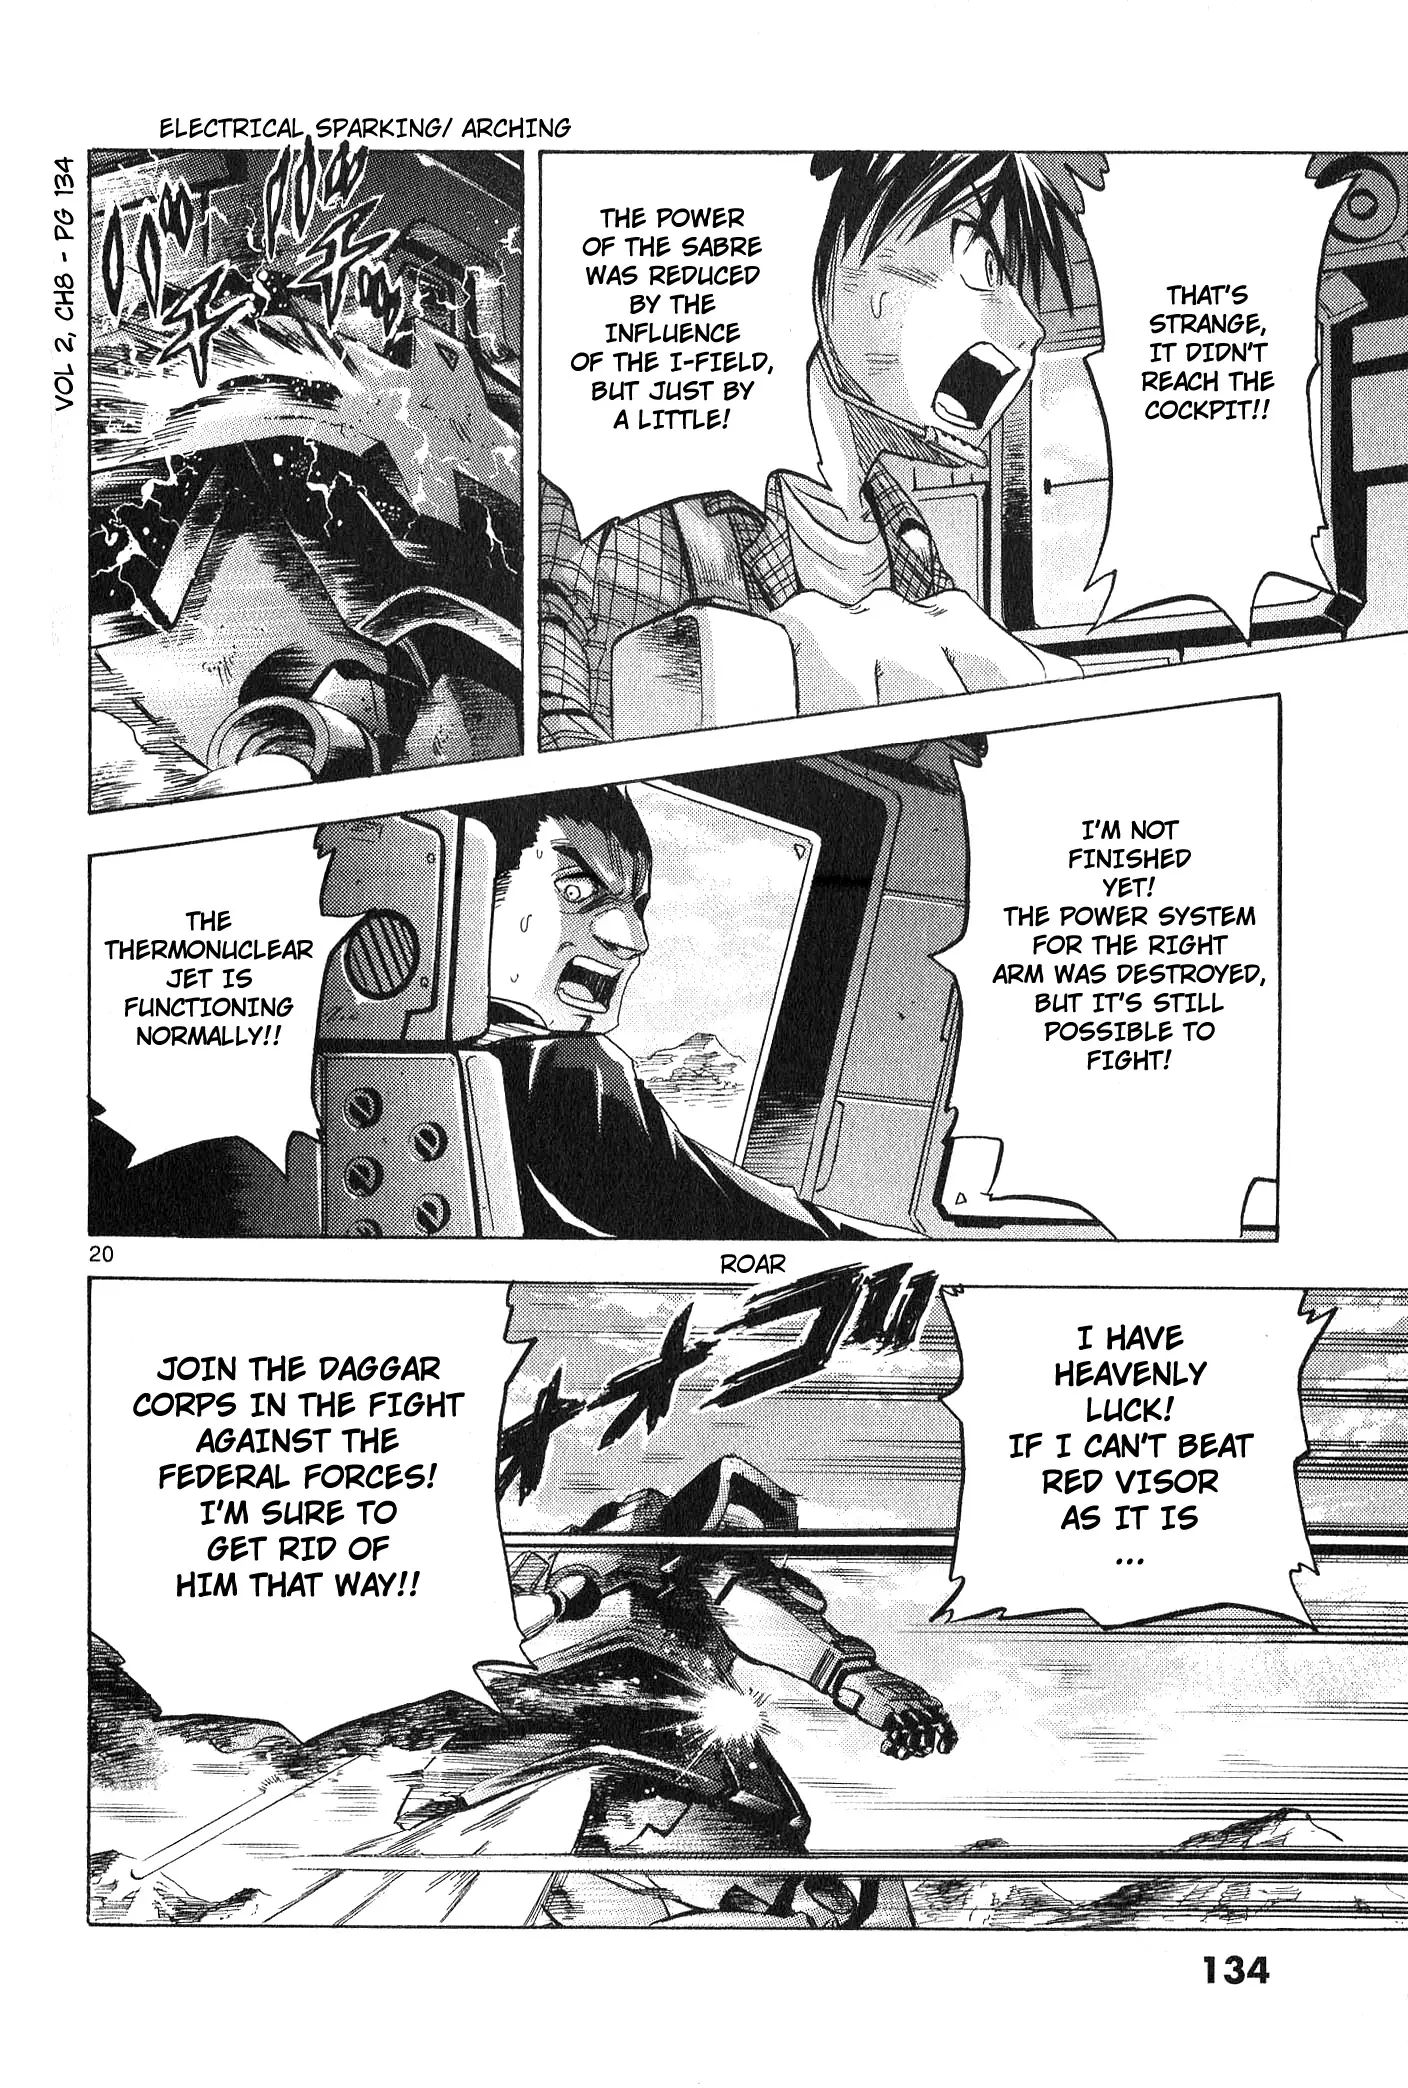 Mobile Suit Gundam Aggressor - 8 page 17-8f4a3237